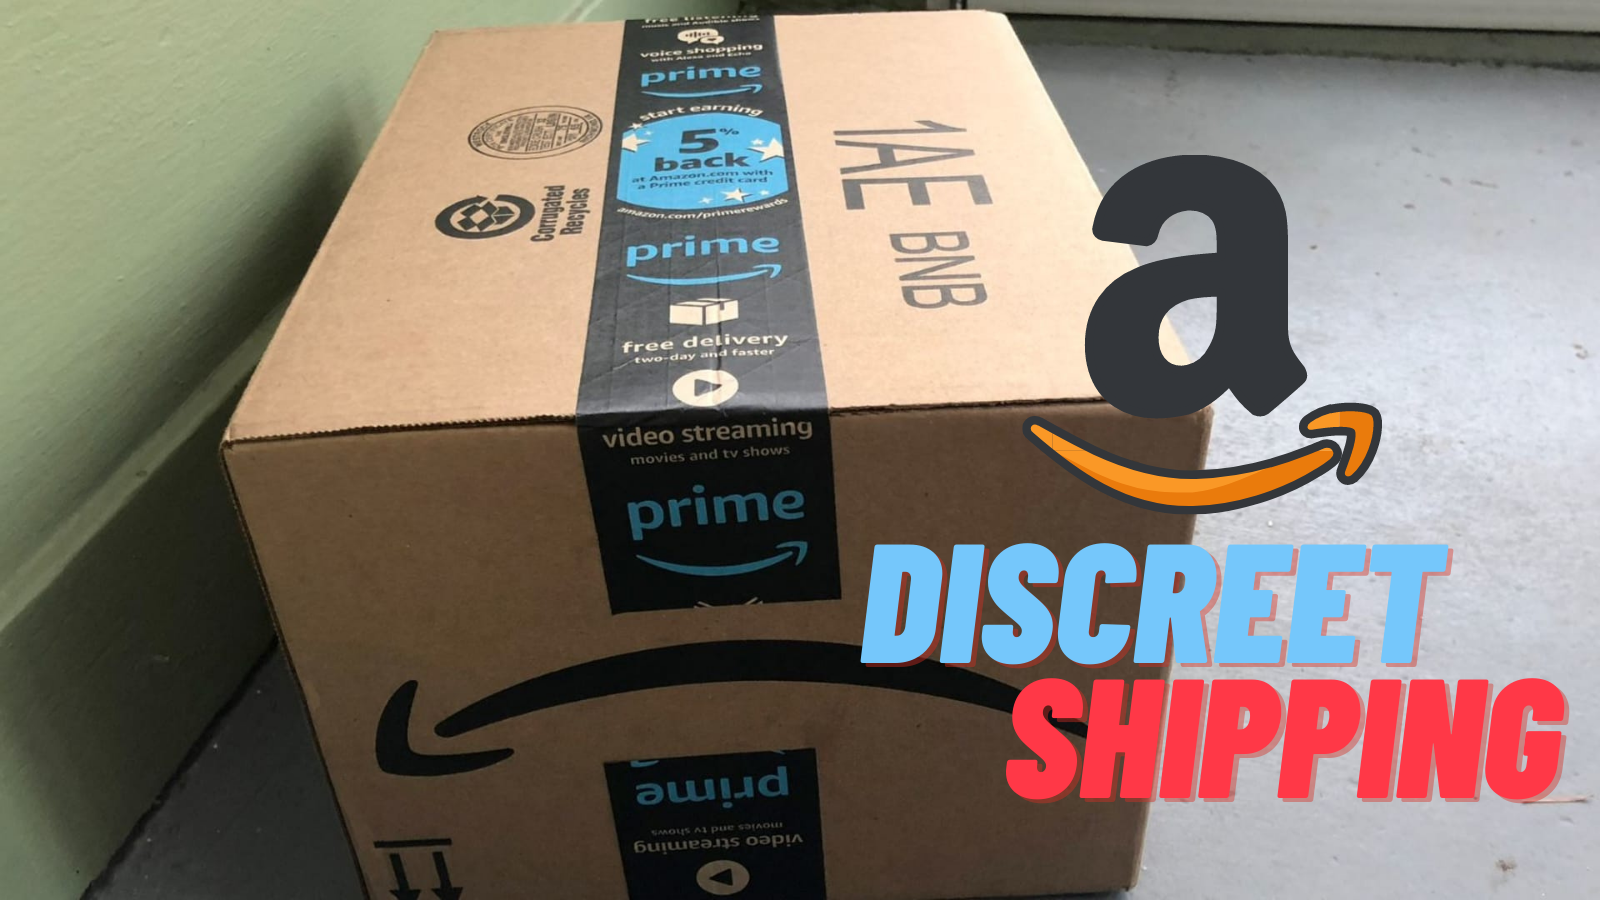 A Complete Guide to Amazon Discreet Shipping in 2022